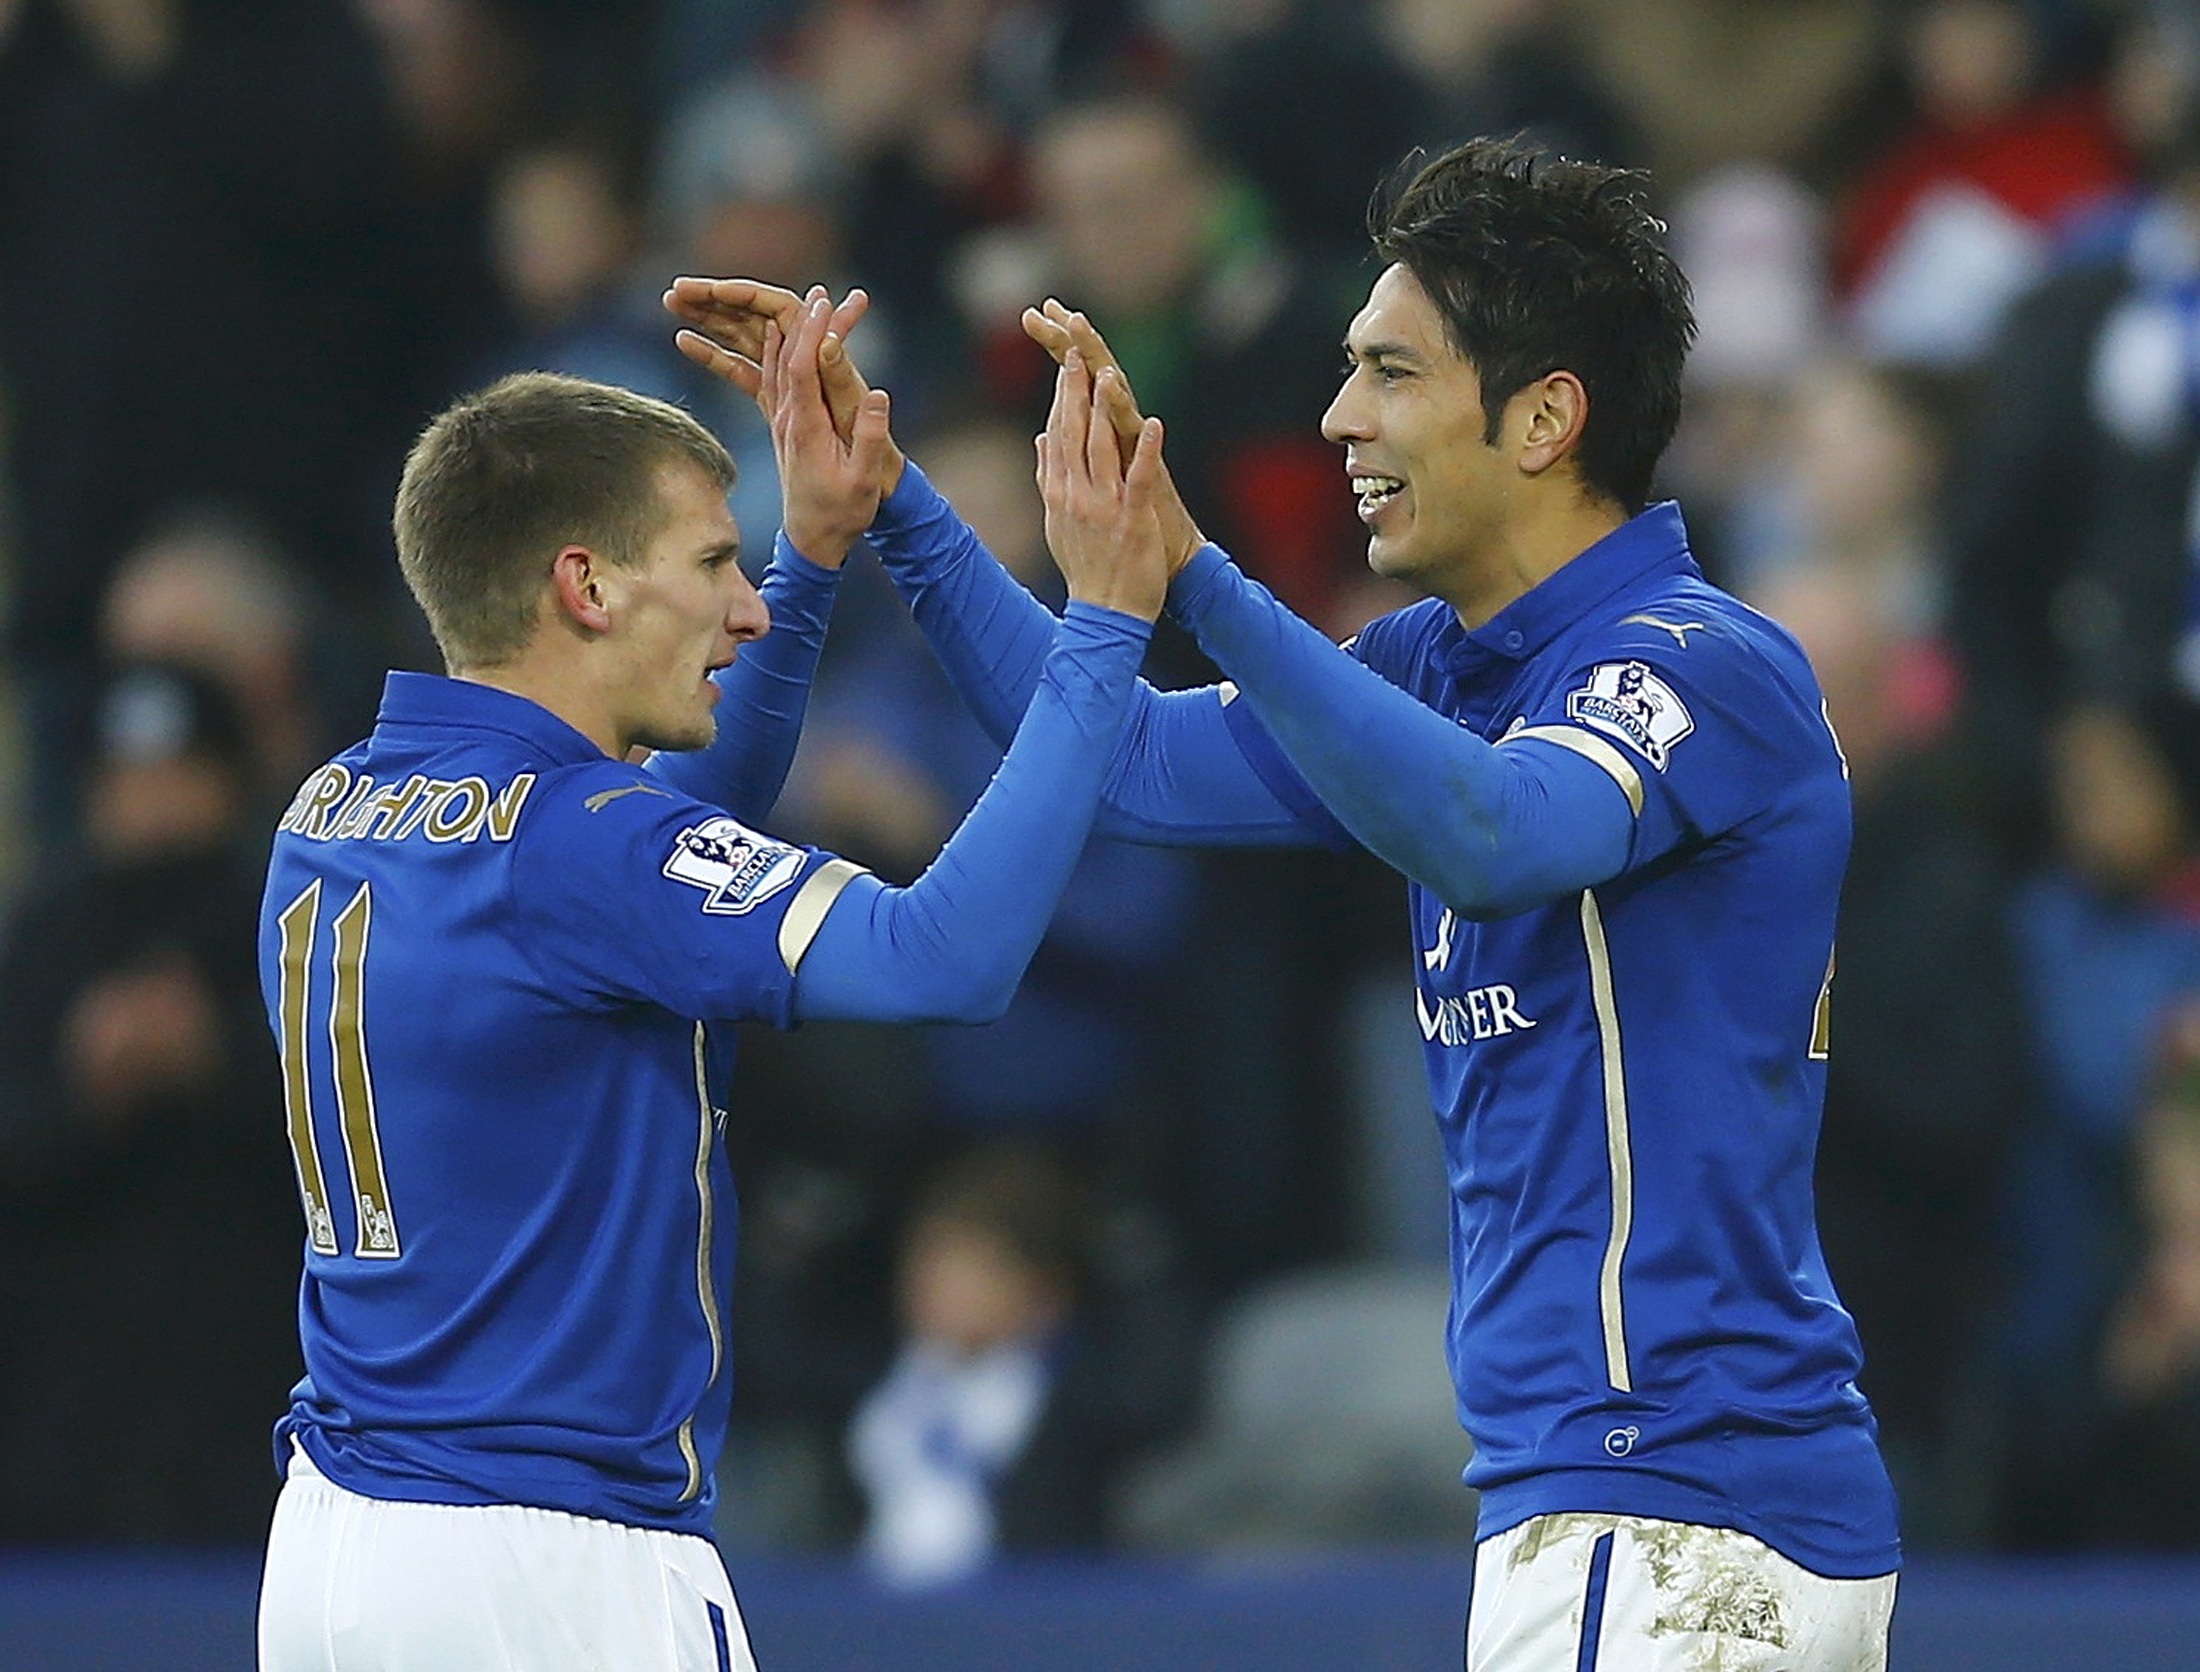 Leonardo Ulloa of Leicester City celebrates with team mate Wes Morgan after scoring against Newcastle United during their FA Cup third round soccer match at the King Power Stadium, in Leicester, central England